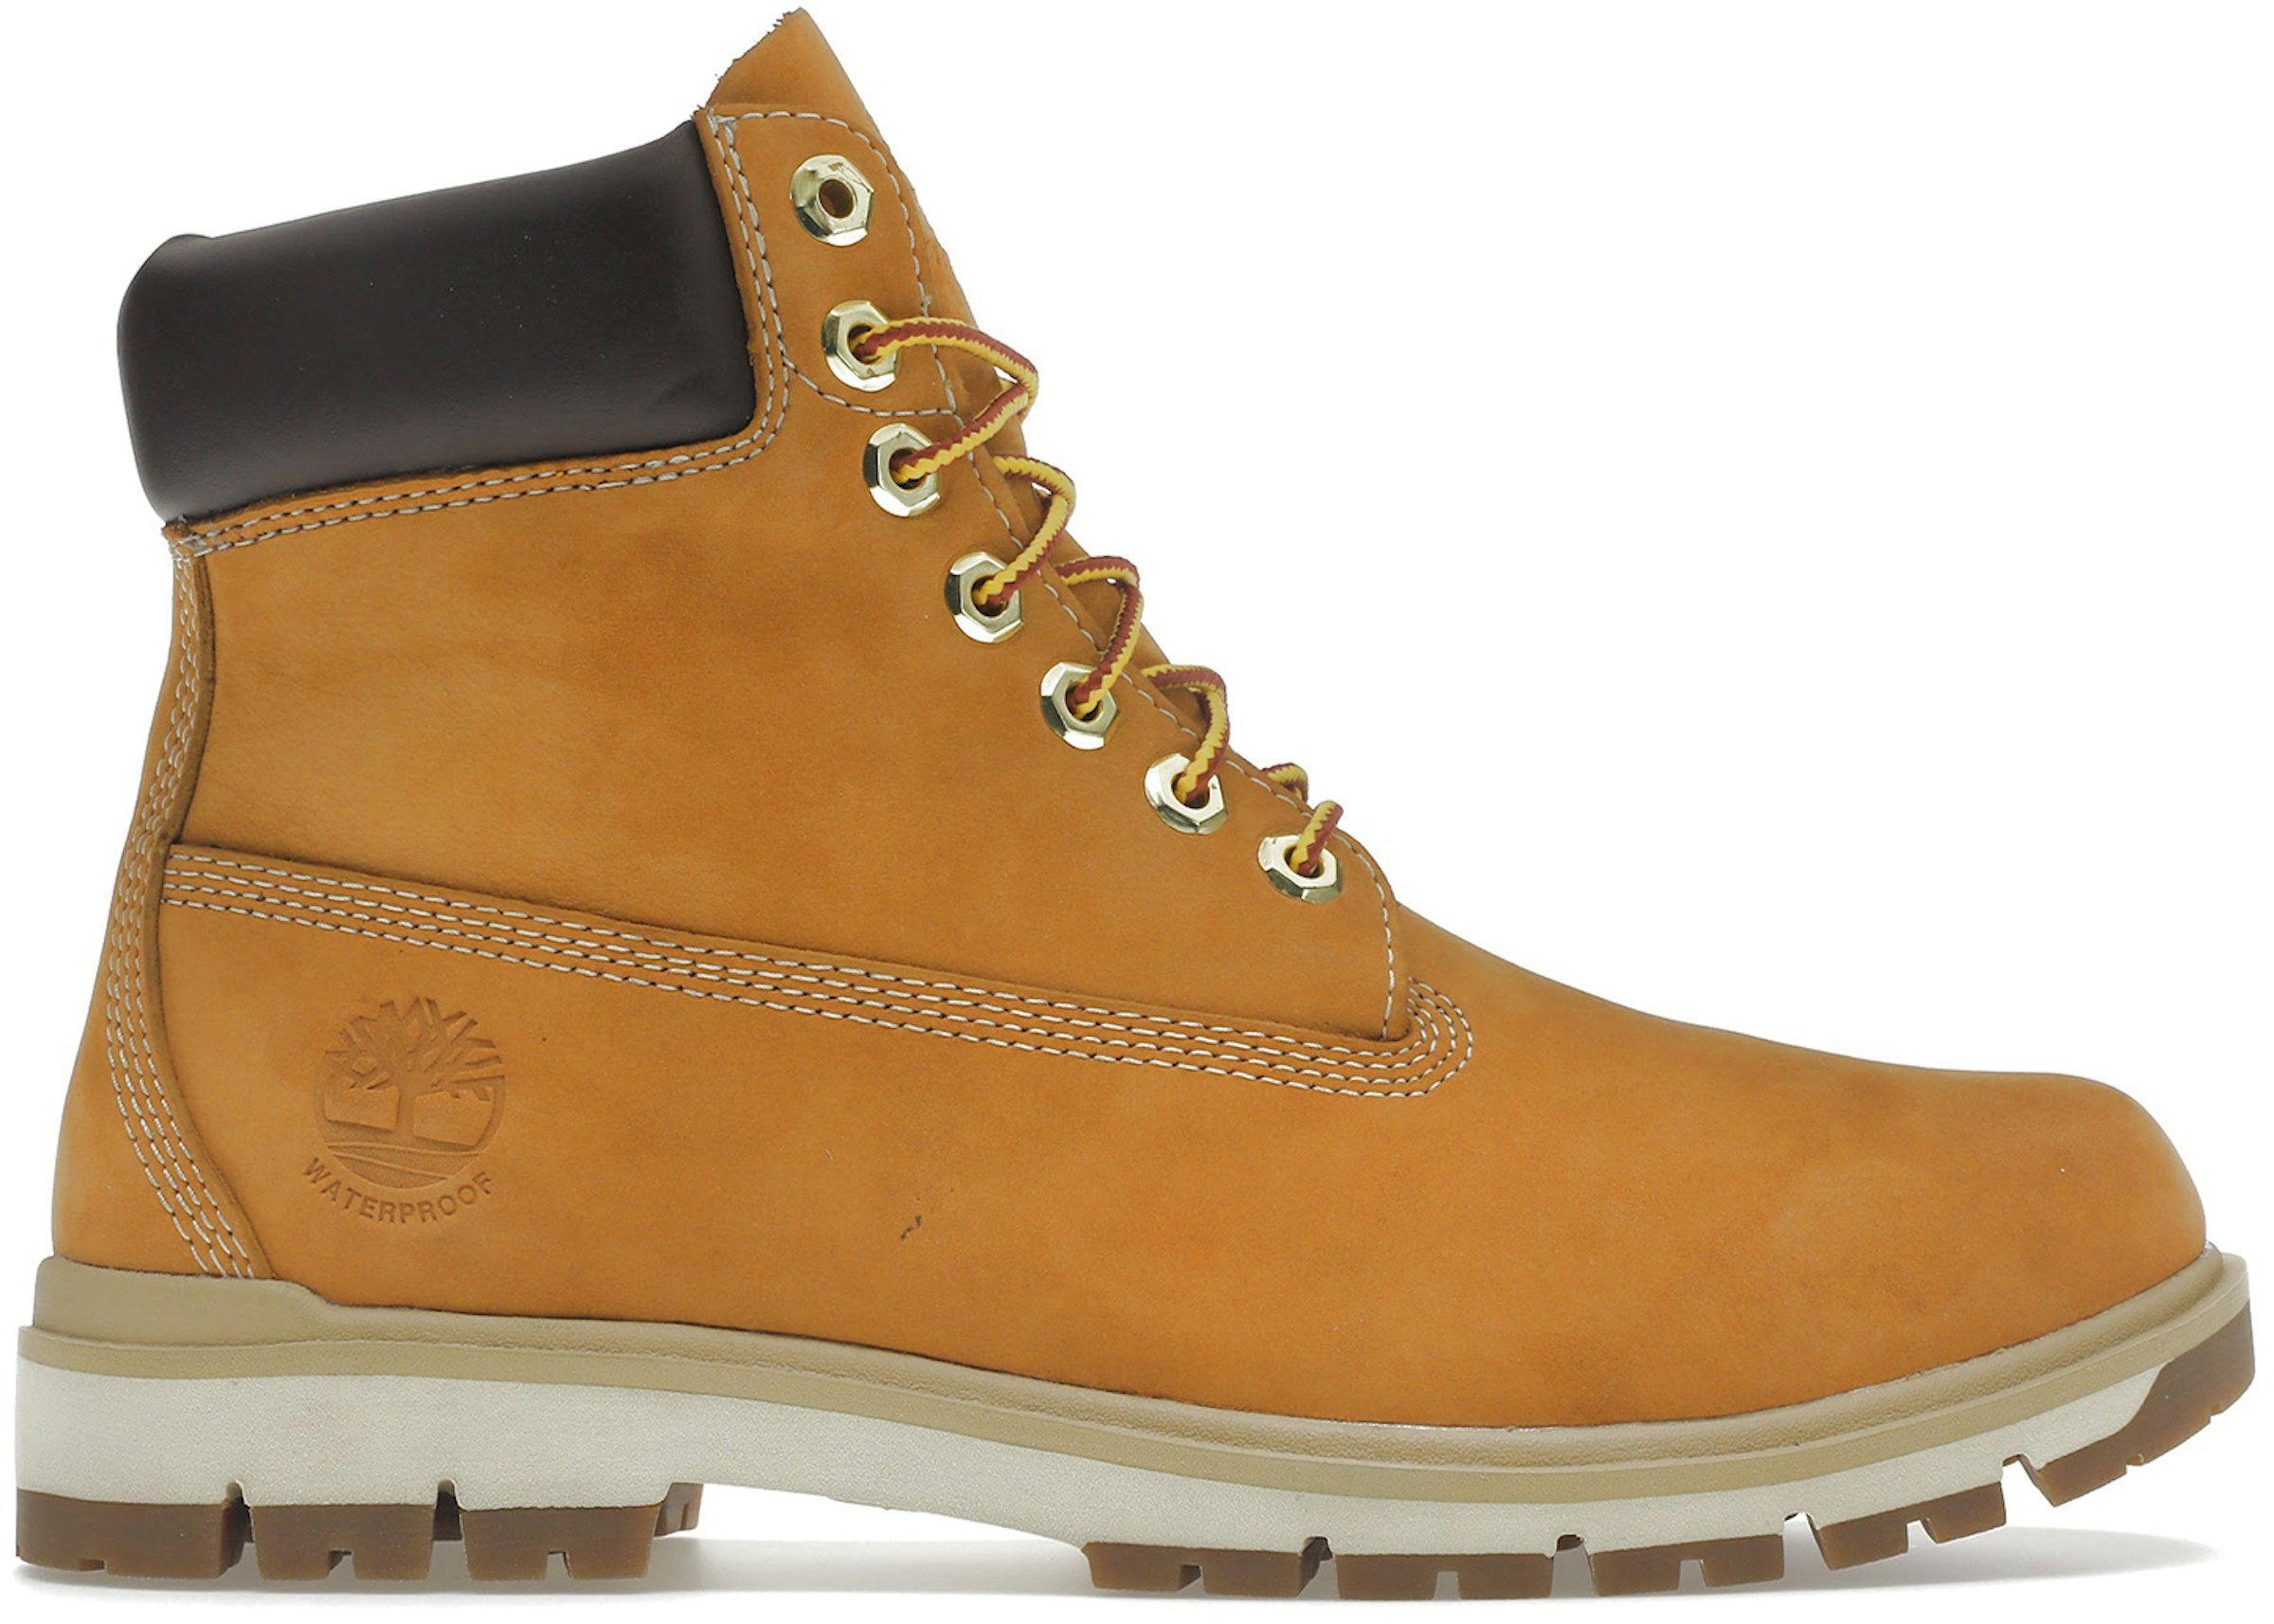 Meandro Productivo En particular Timberland Radford 6" Boot Wheat Men's - A1JHF231 - US